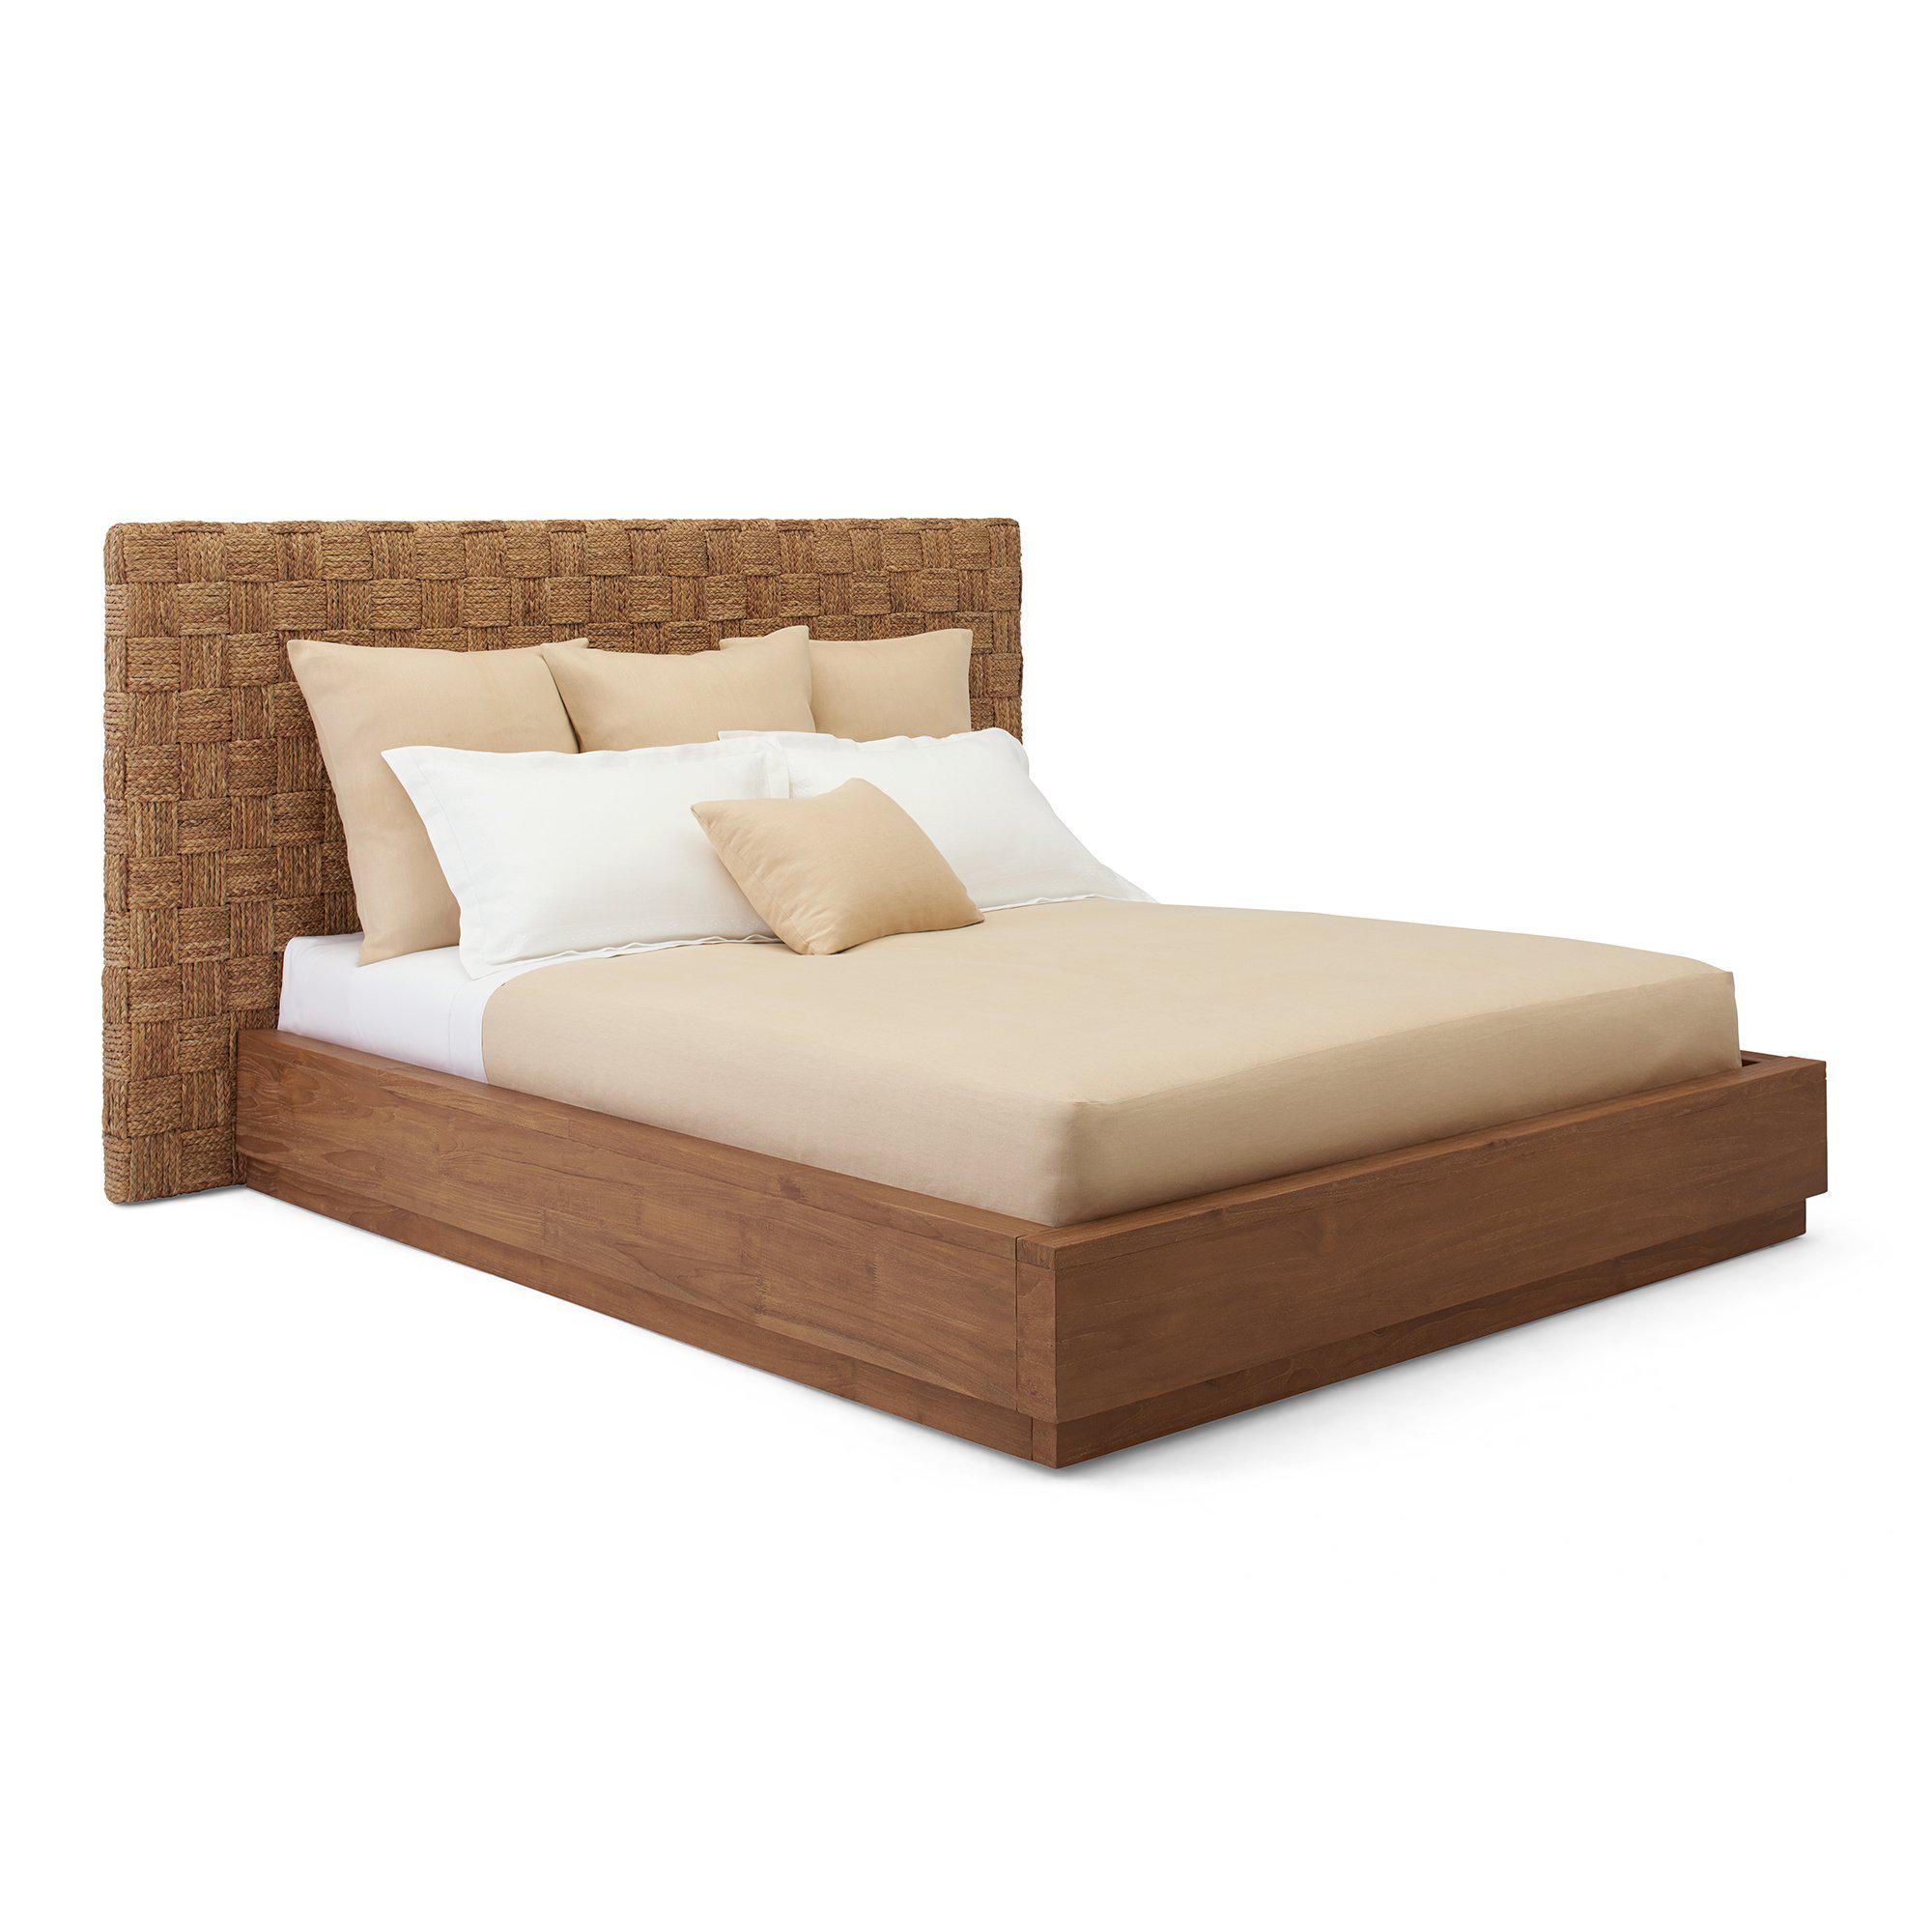 Sanora Canyon Queen Bed